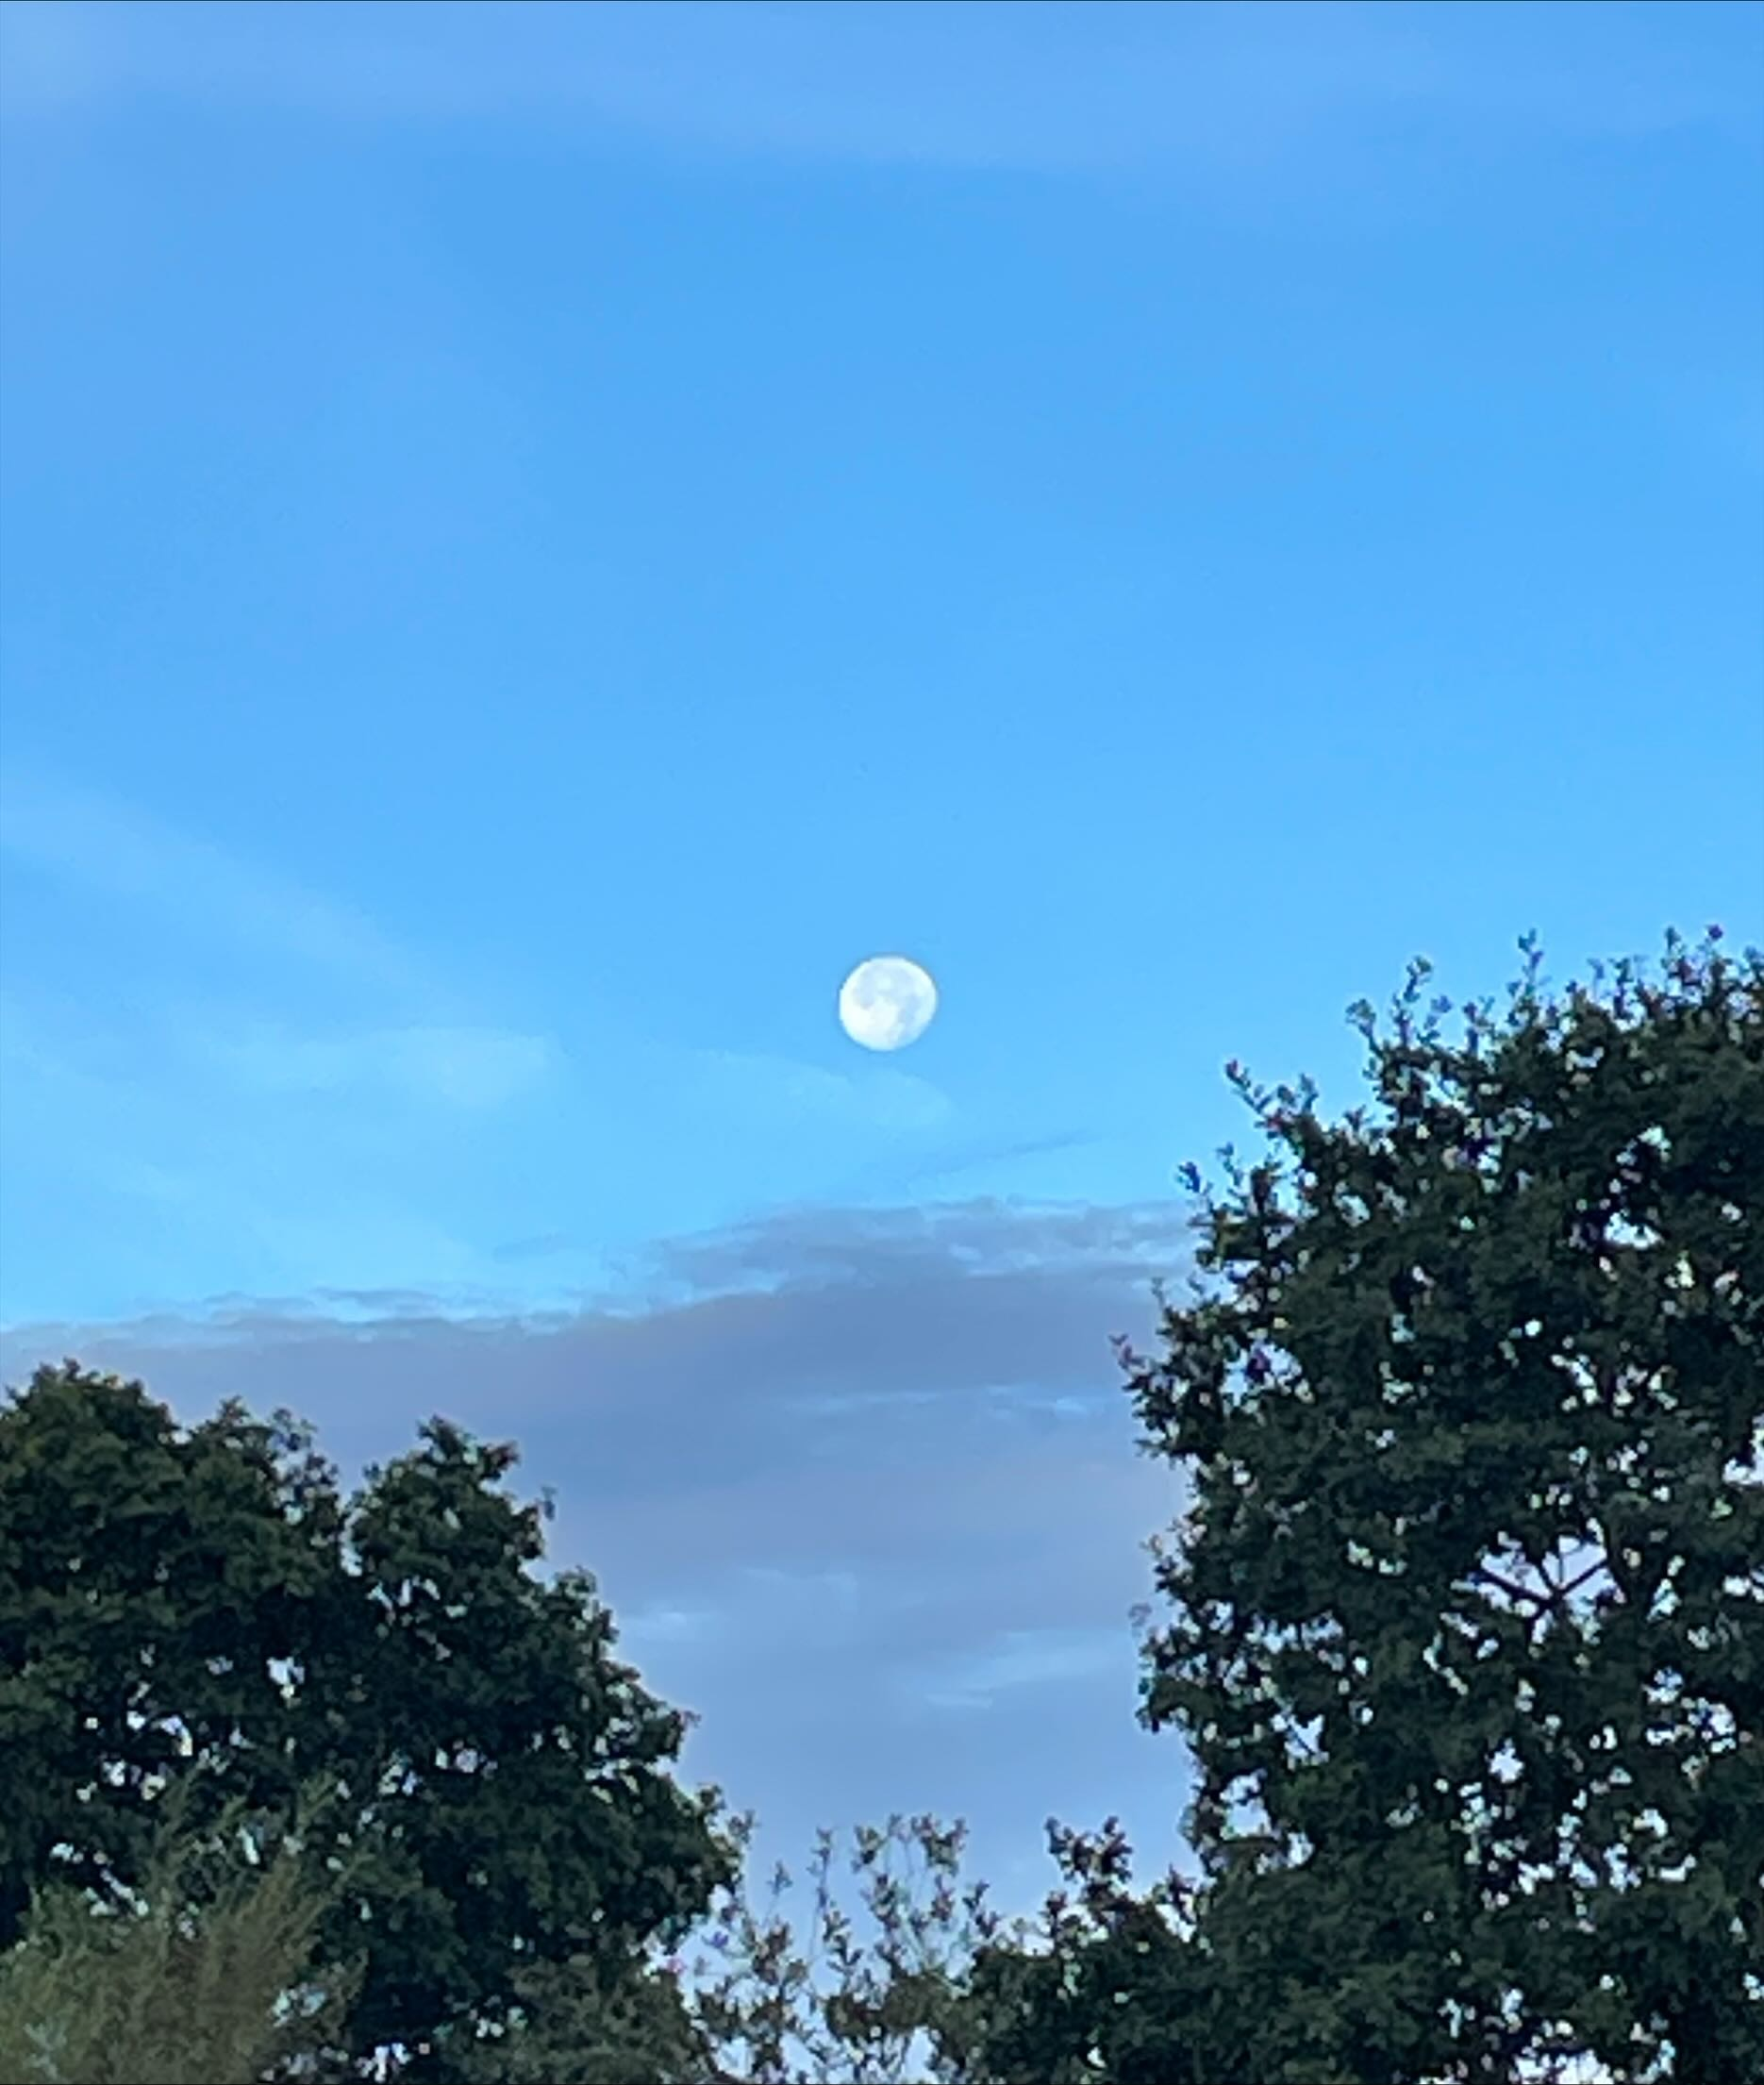 Bad, over-zoomed phto of the moon in the sky during the day over some trees